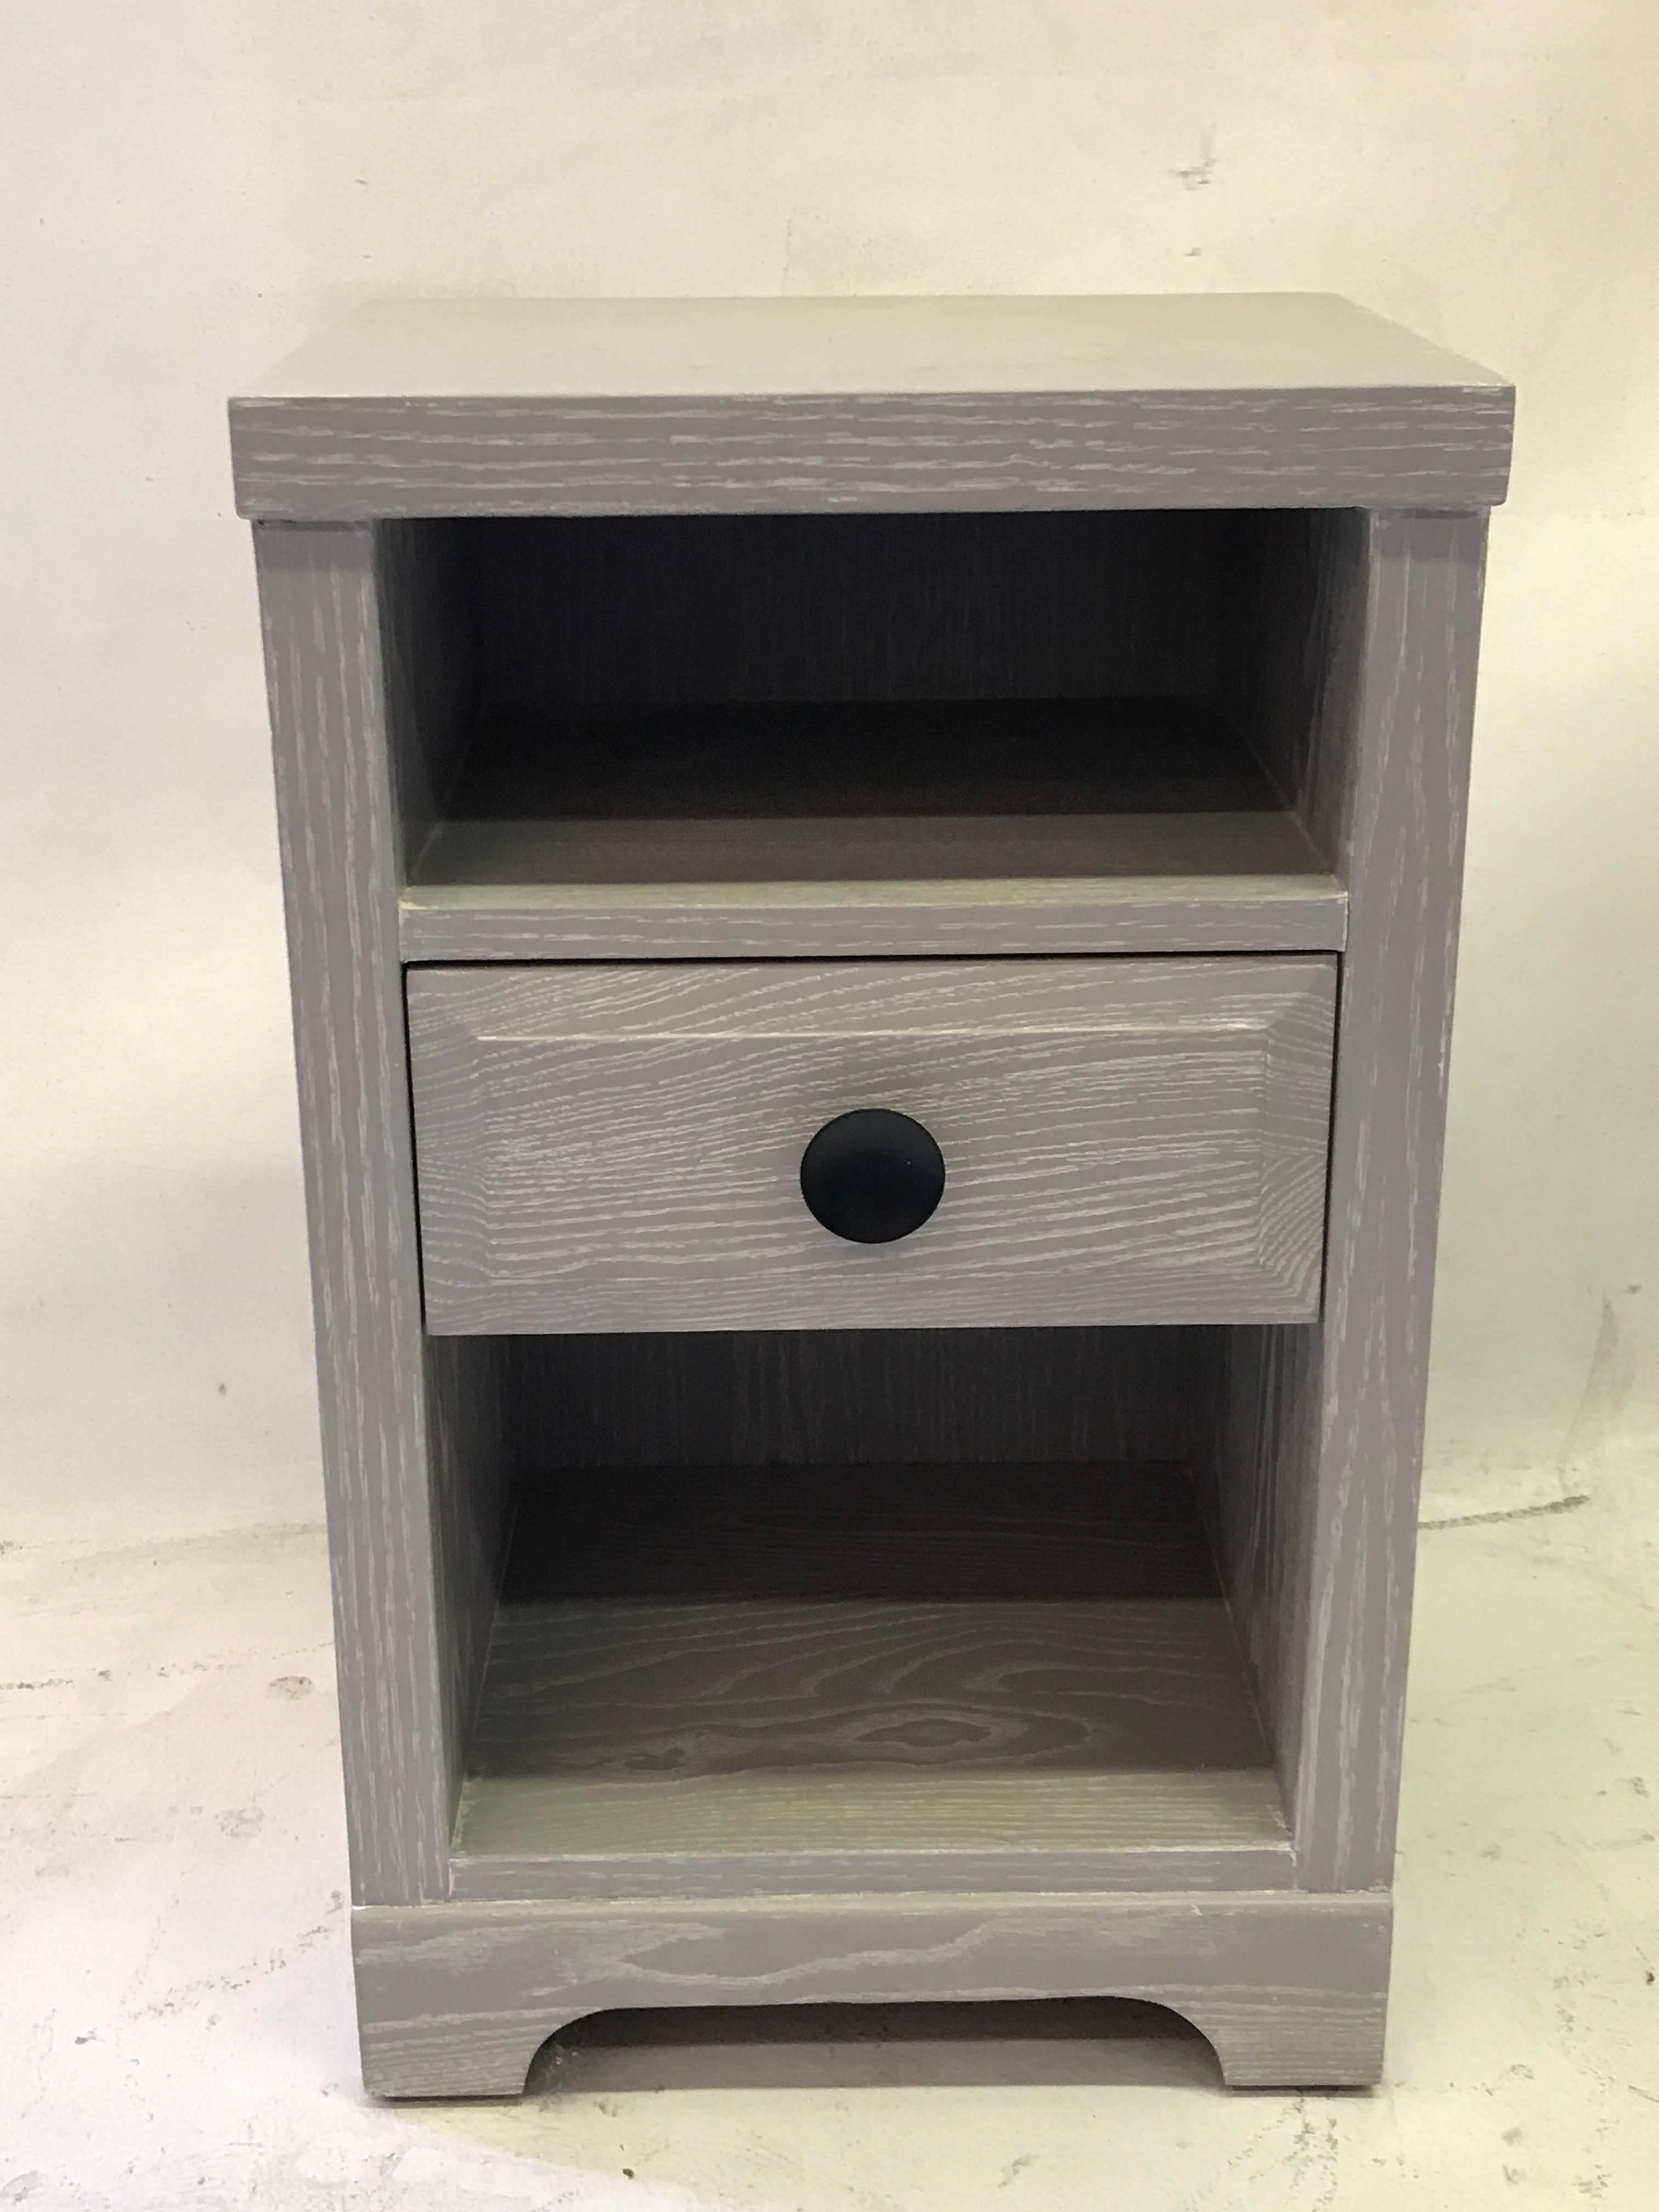 These nightstands are made of oak with a gray cerused finish.
They feature a drawer with a big black metal knob and two empty spaces.